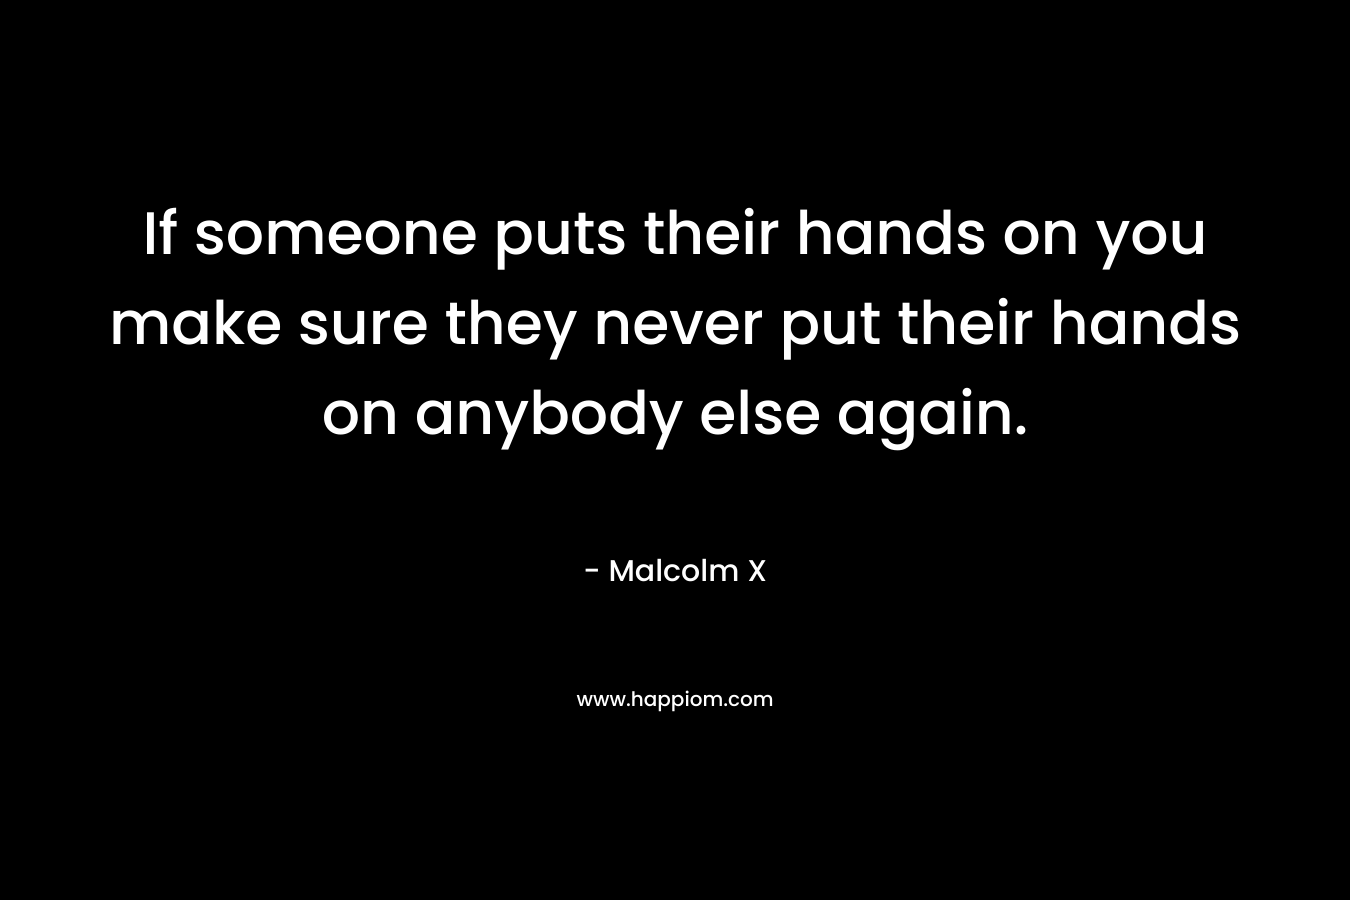 If someone puts their hands on you make sure they never put their hands on anybody else again.